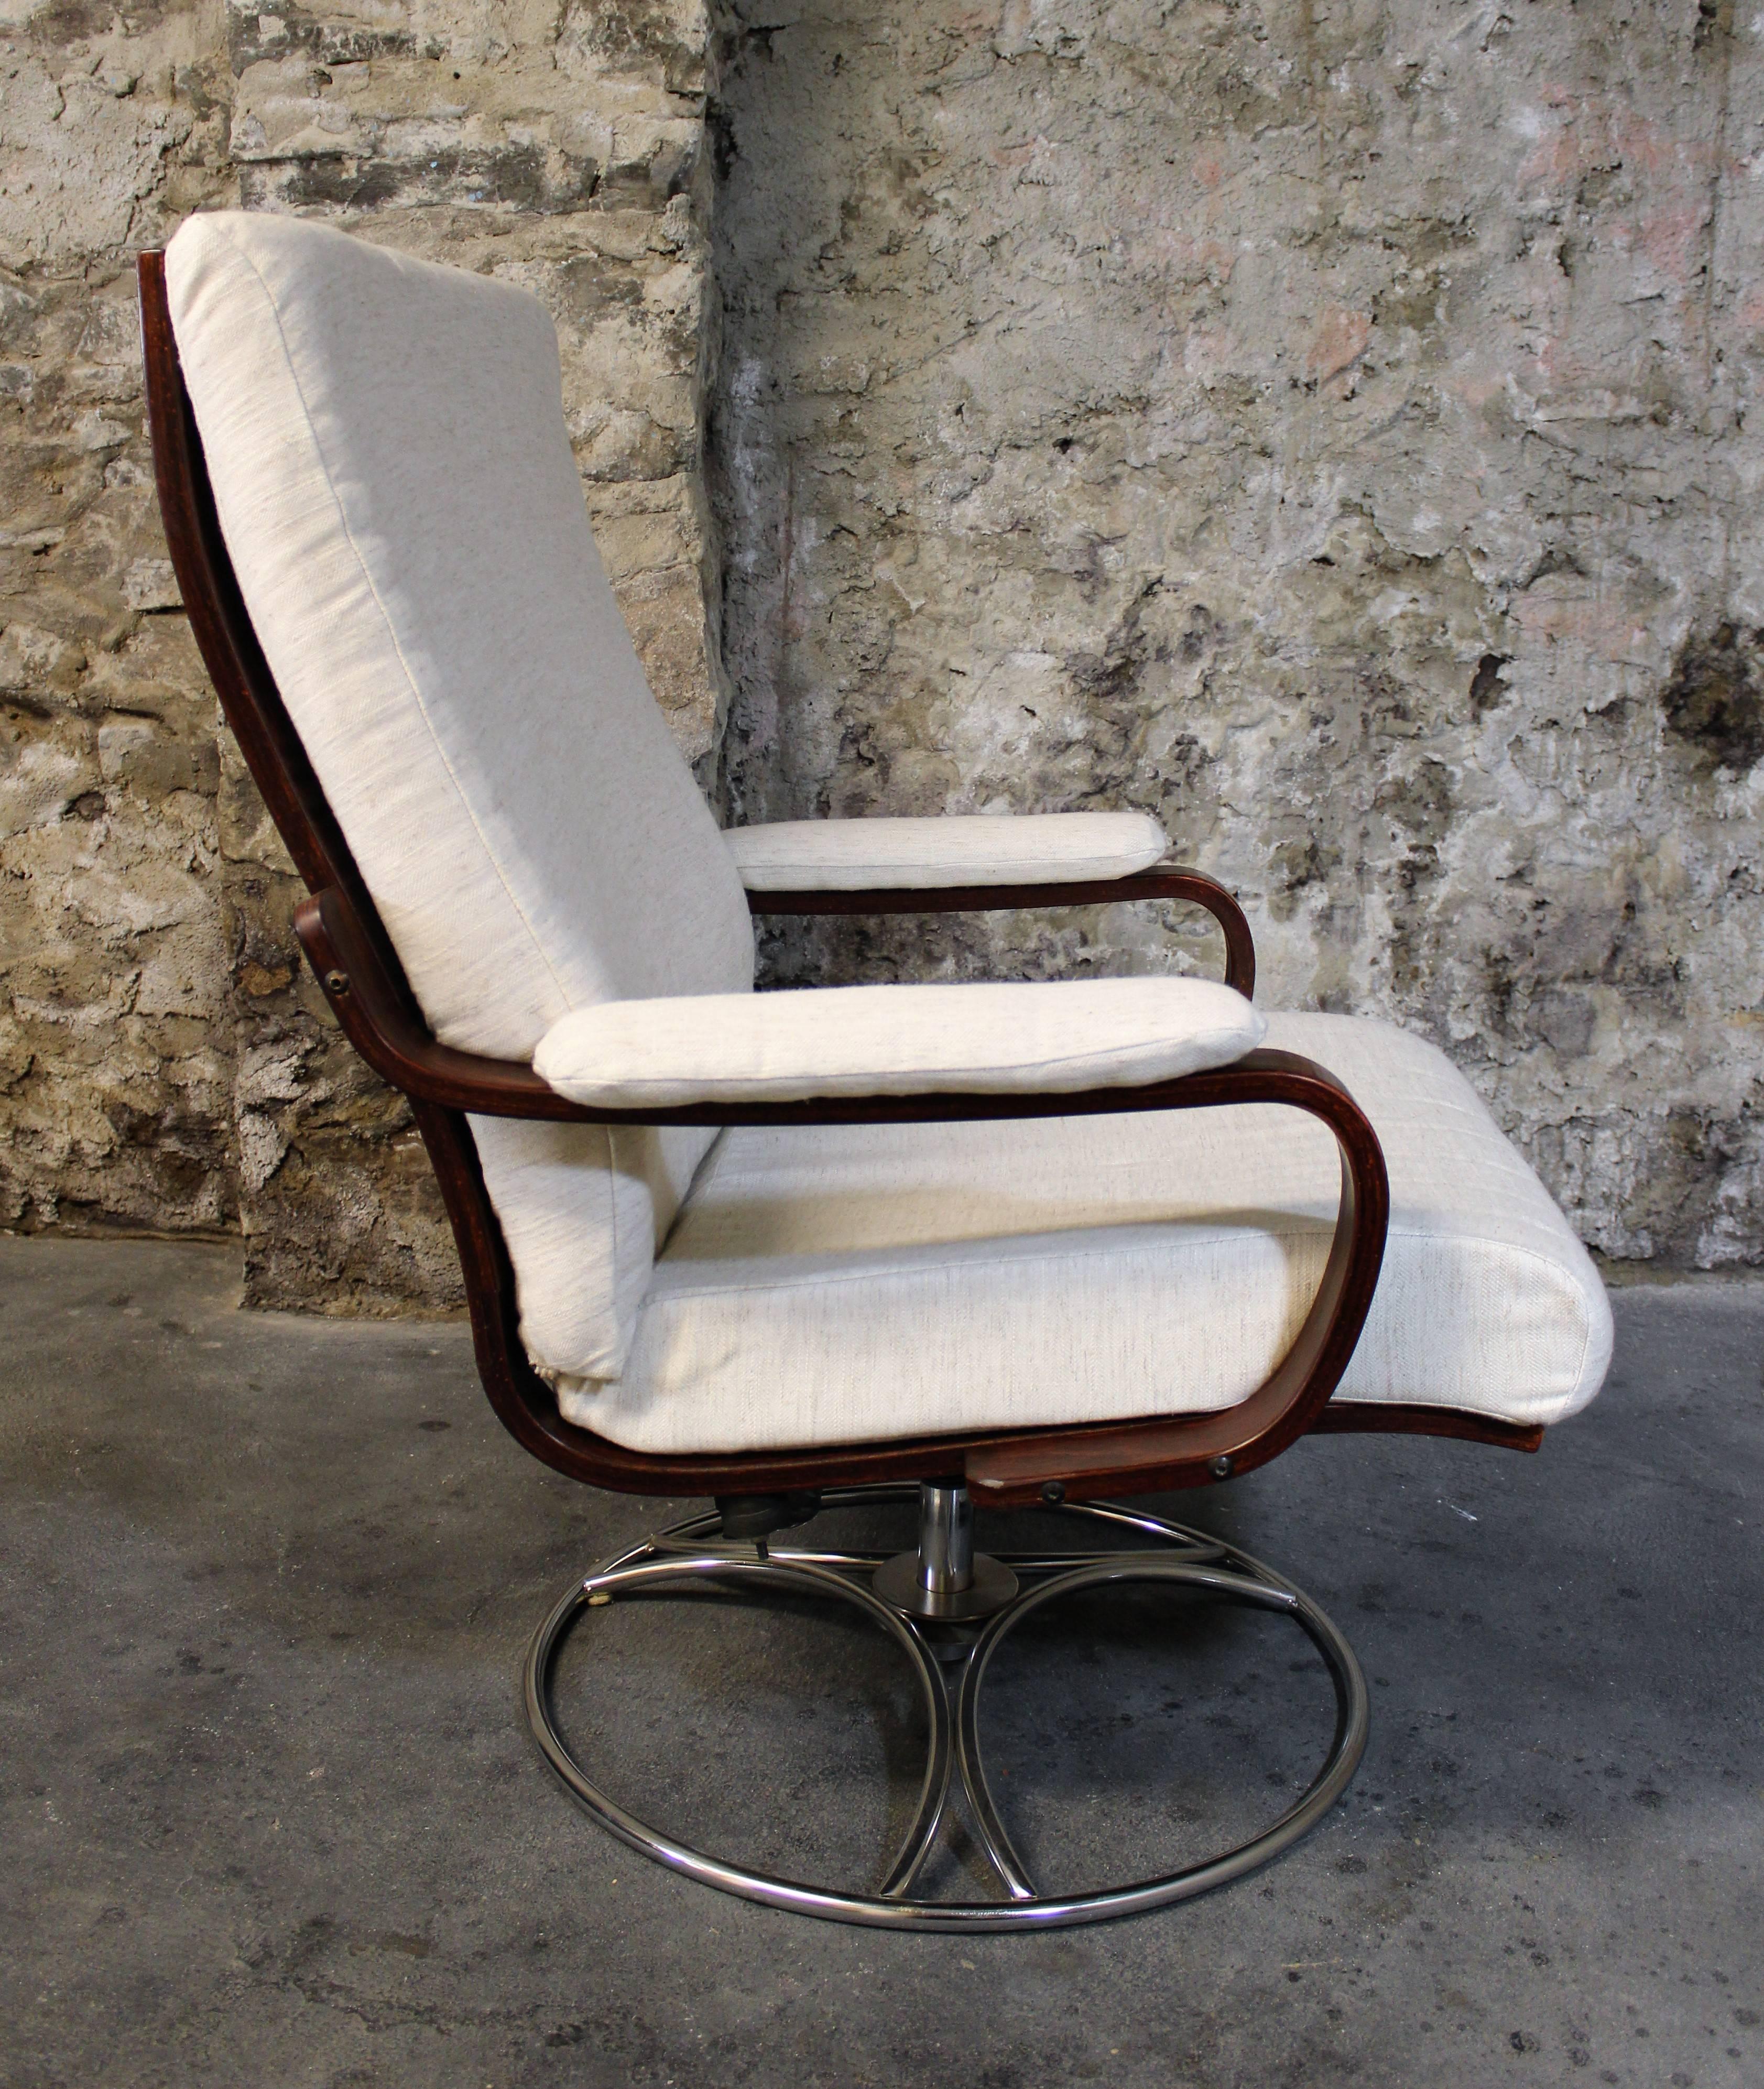 Norwegian bentwood swivel lounge chair by Westnofa with rosewood frame, chrome base and newly upholstered in off-white fabric.

Mid-Century Modern / Scandinavian Modern